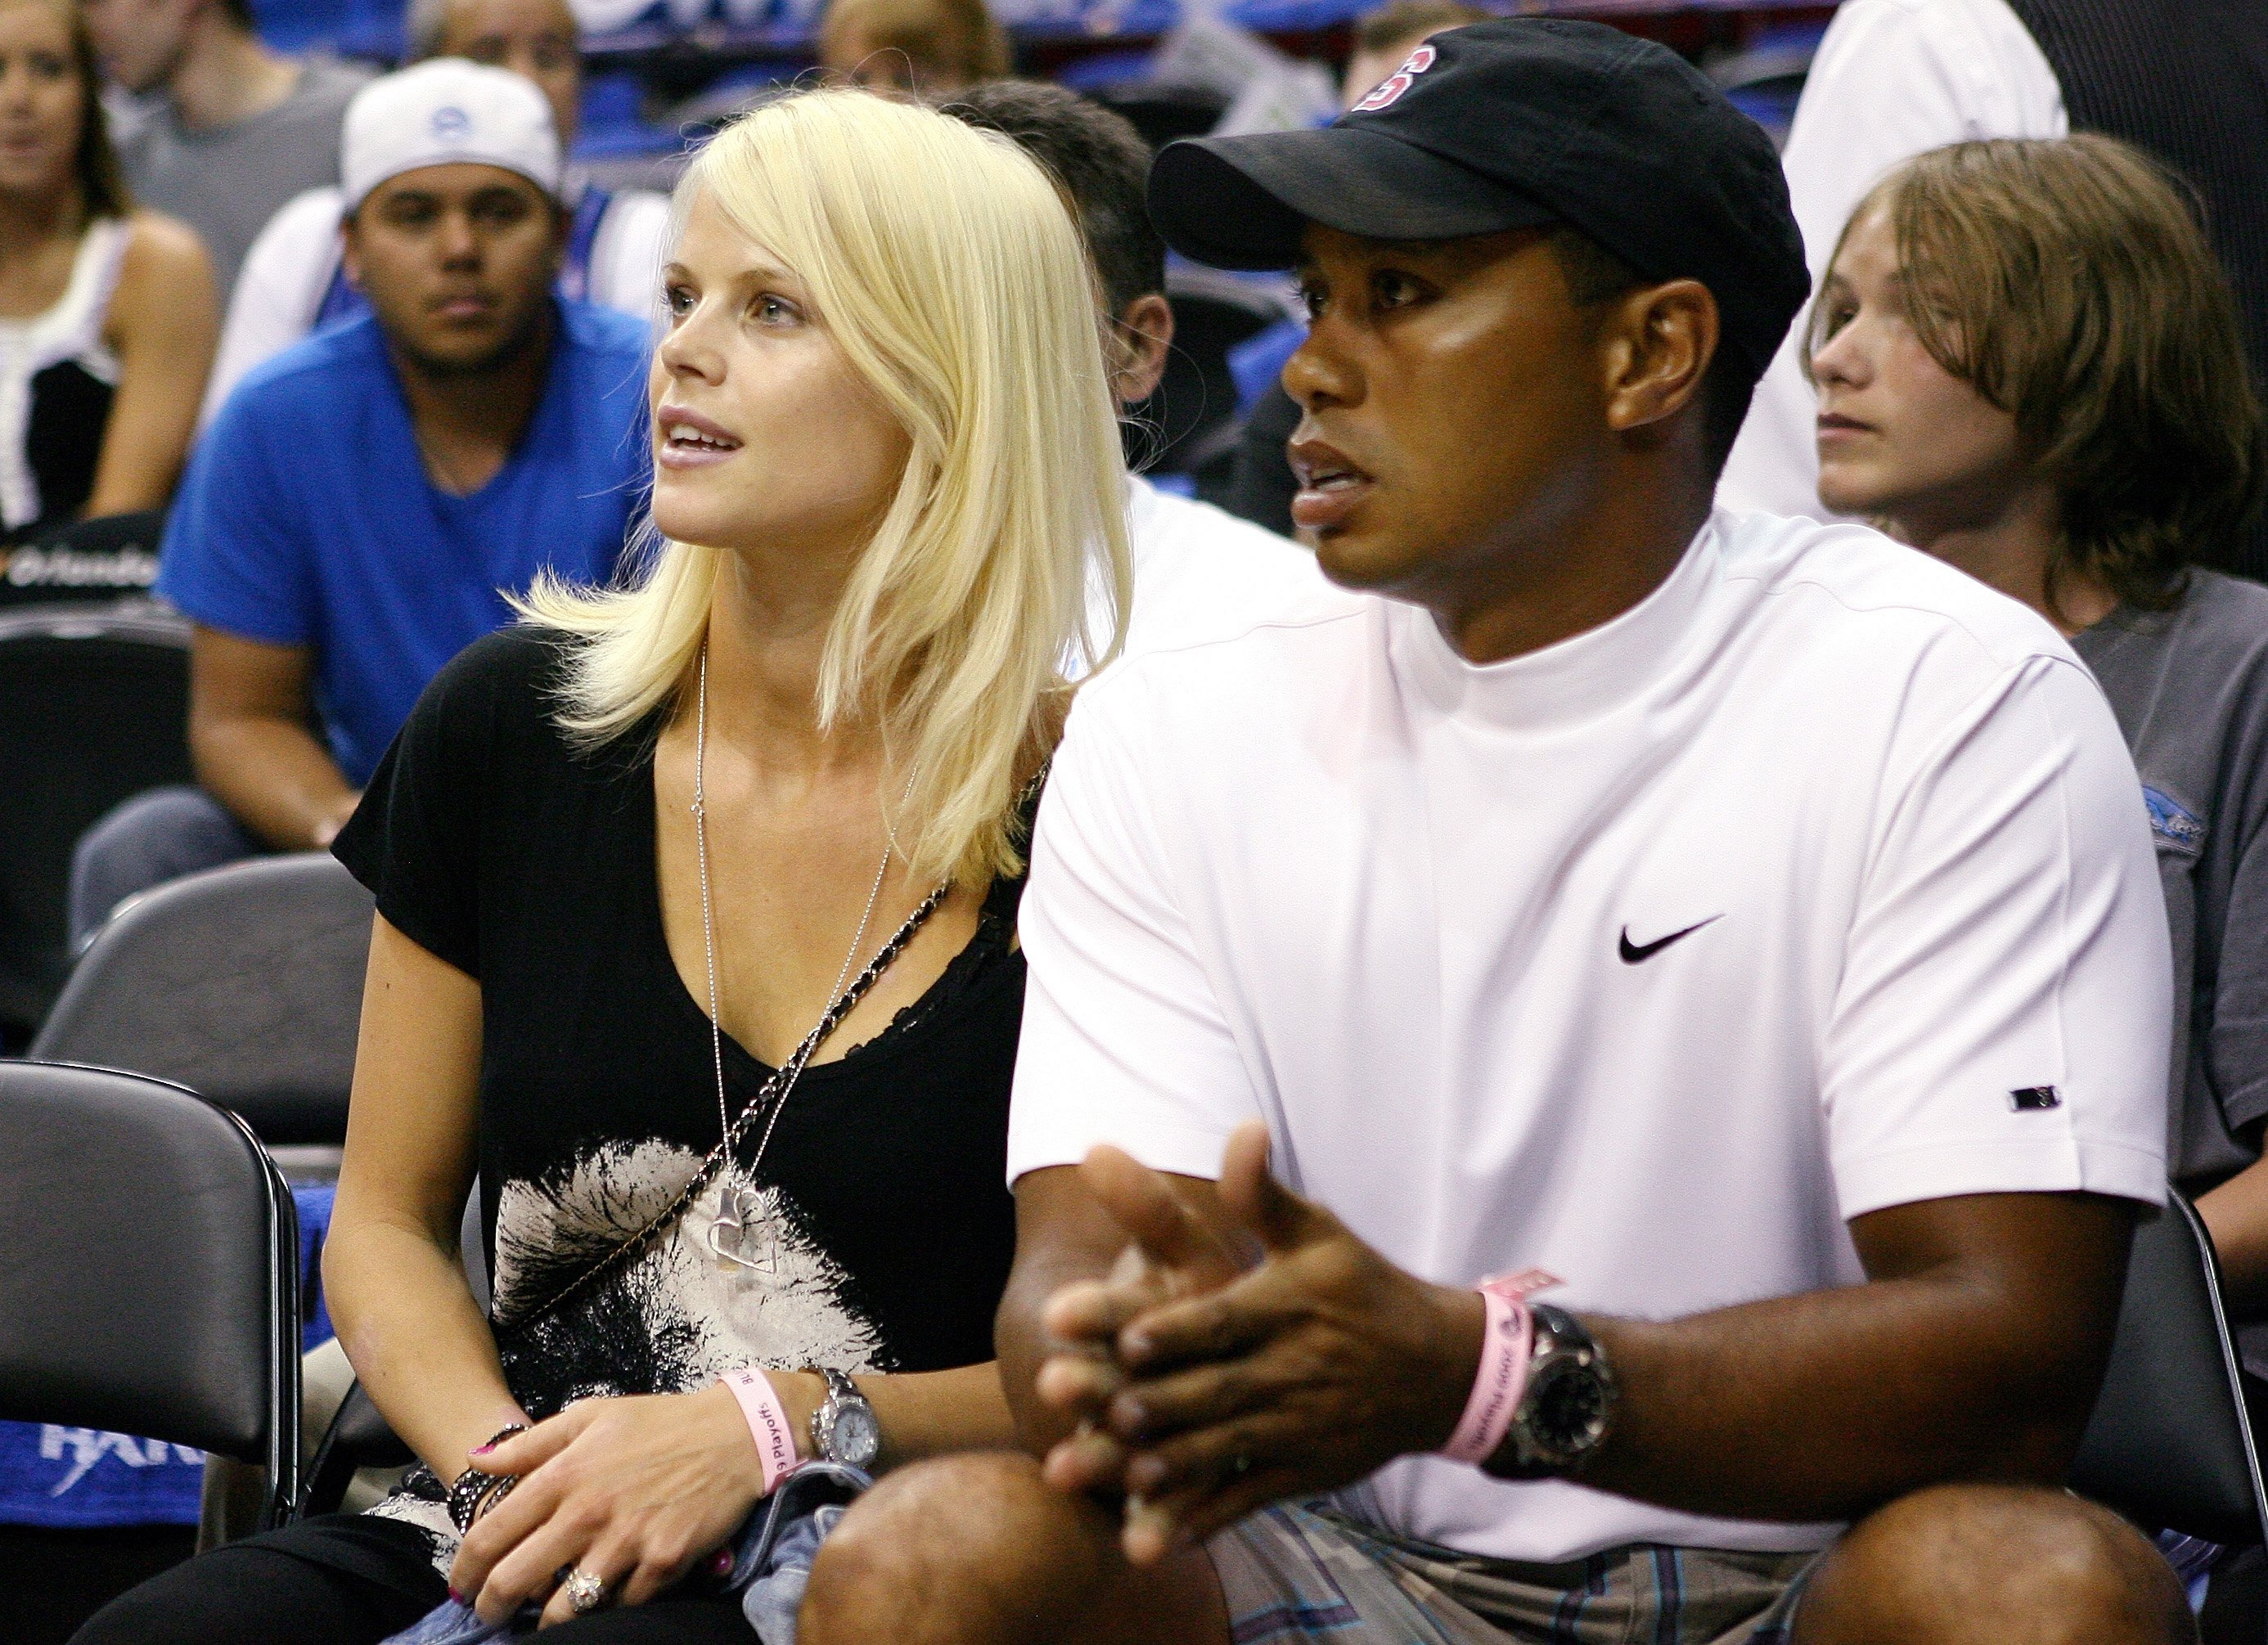 Tiger Woods with his wife Elin Nordegren during Game Four of the 2009 NBA Finals at Amway Arena on June 11, 2009 in Orlando, Florida. | Source: Getty Images